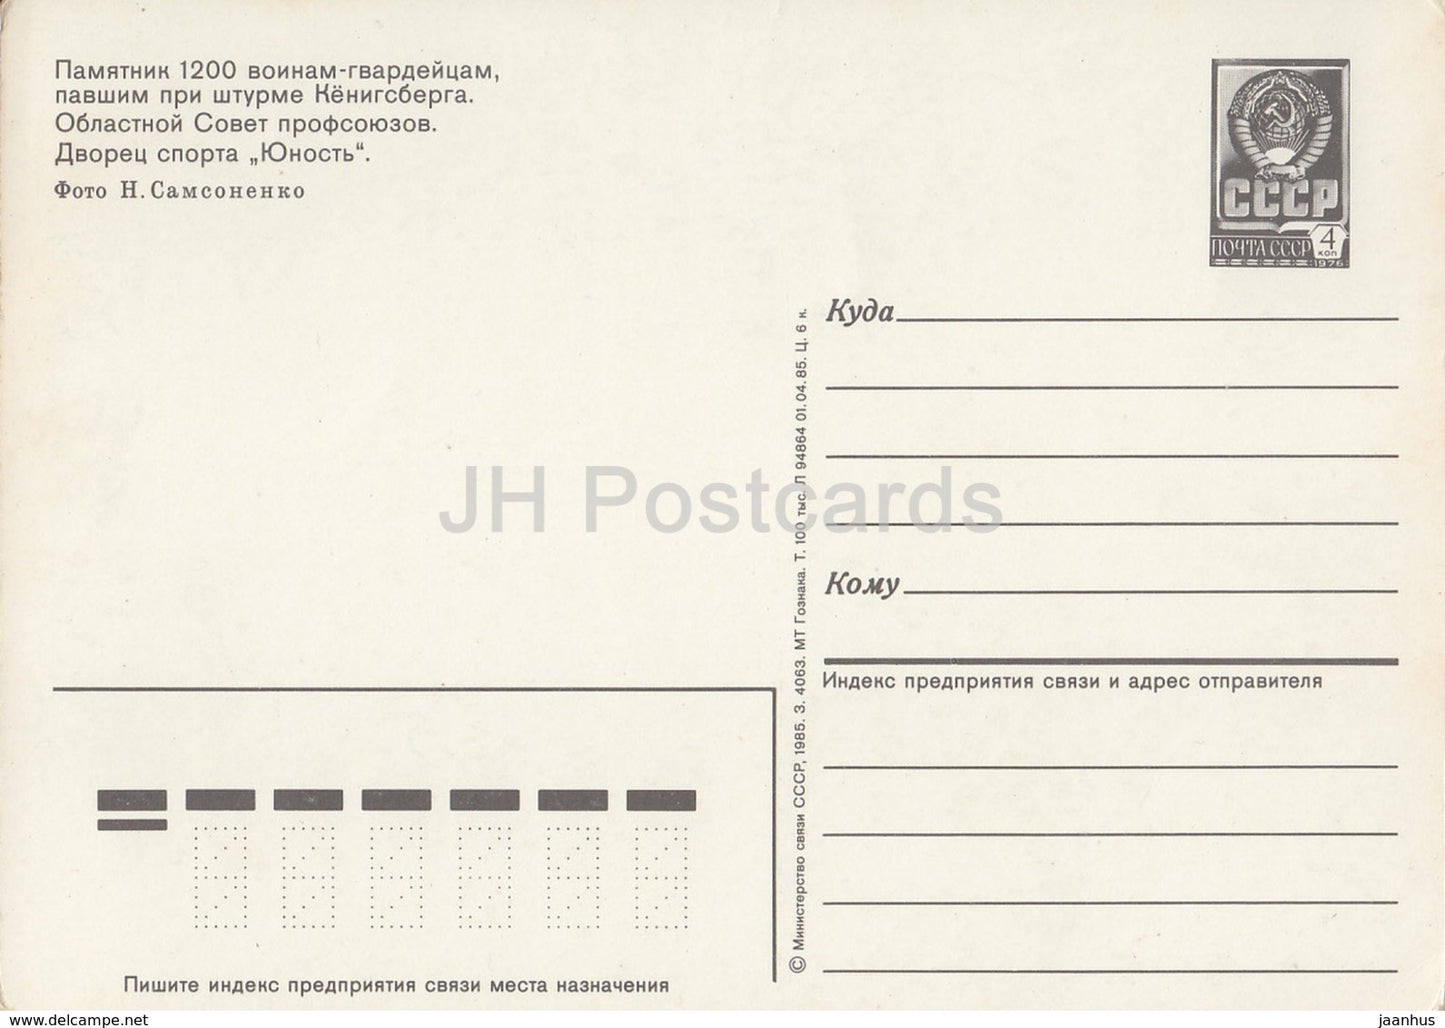 Kaliningrad - memorial to 1200 guards soldiers - Sports Hall Yunost - postal stationery - 1985 - Russia USSR - unused